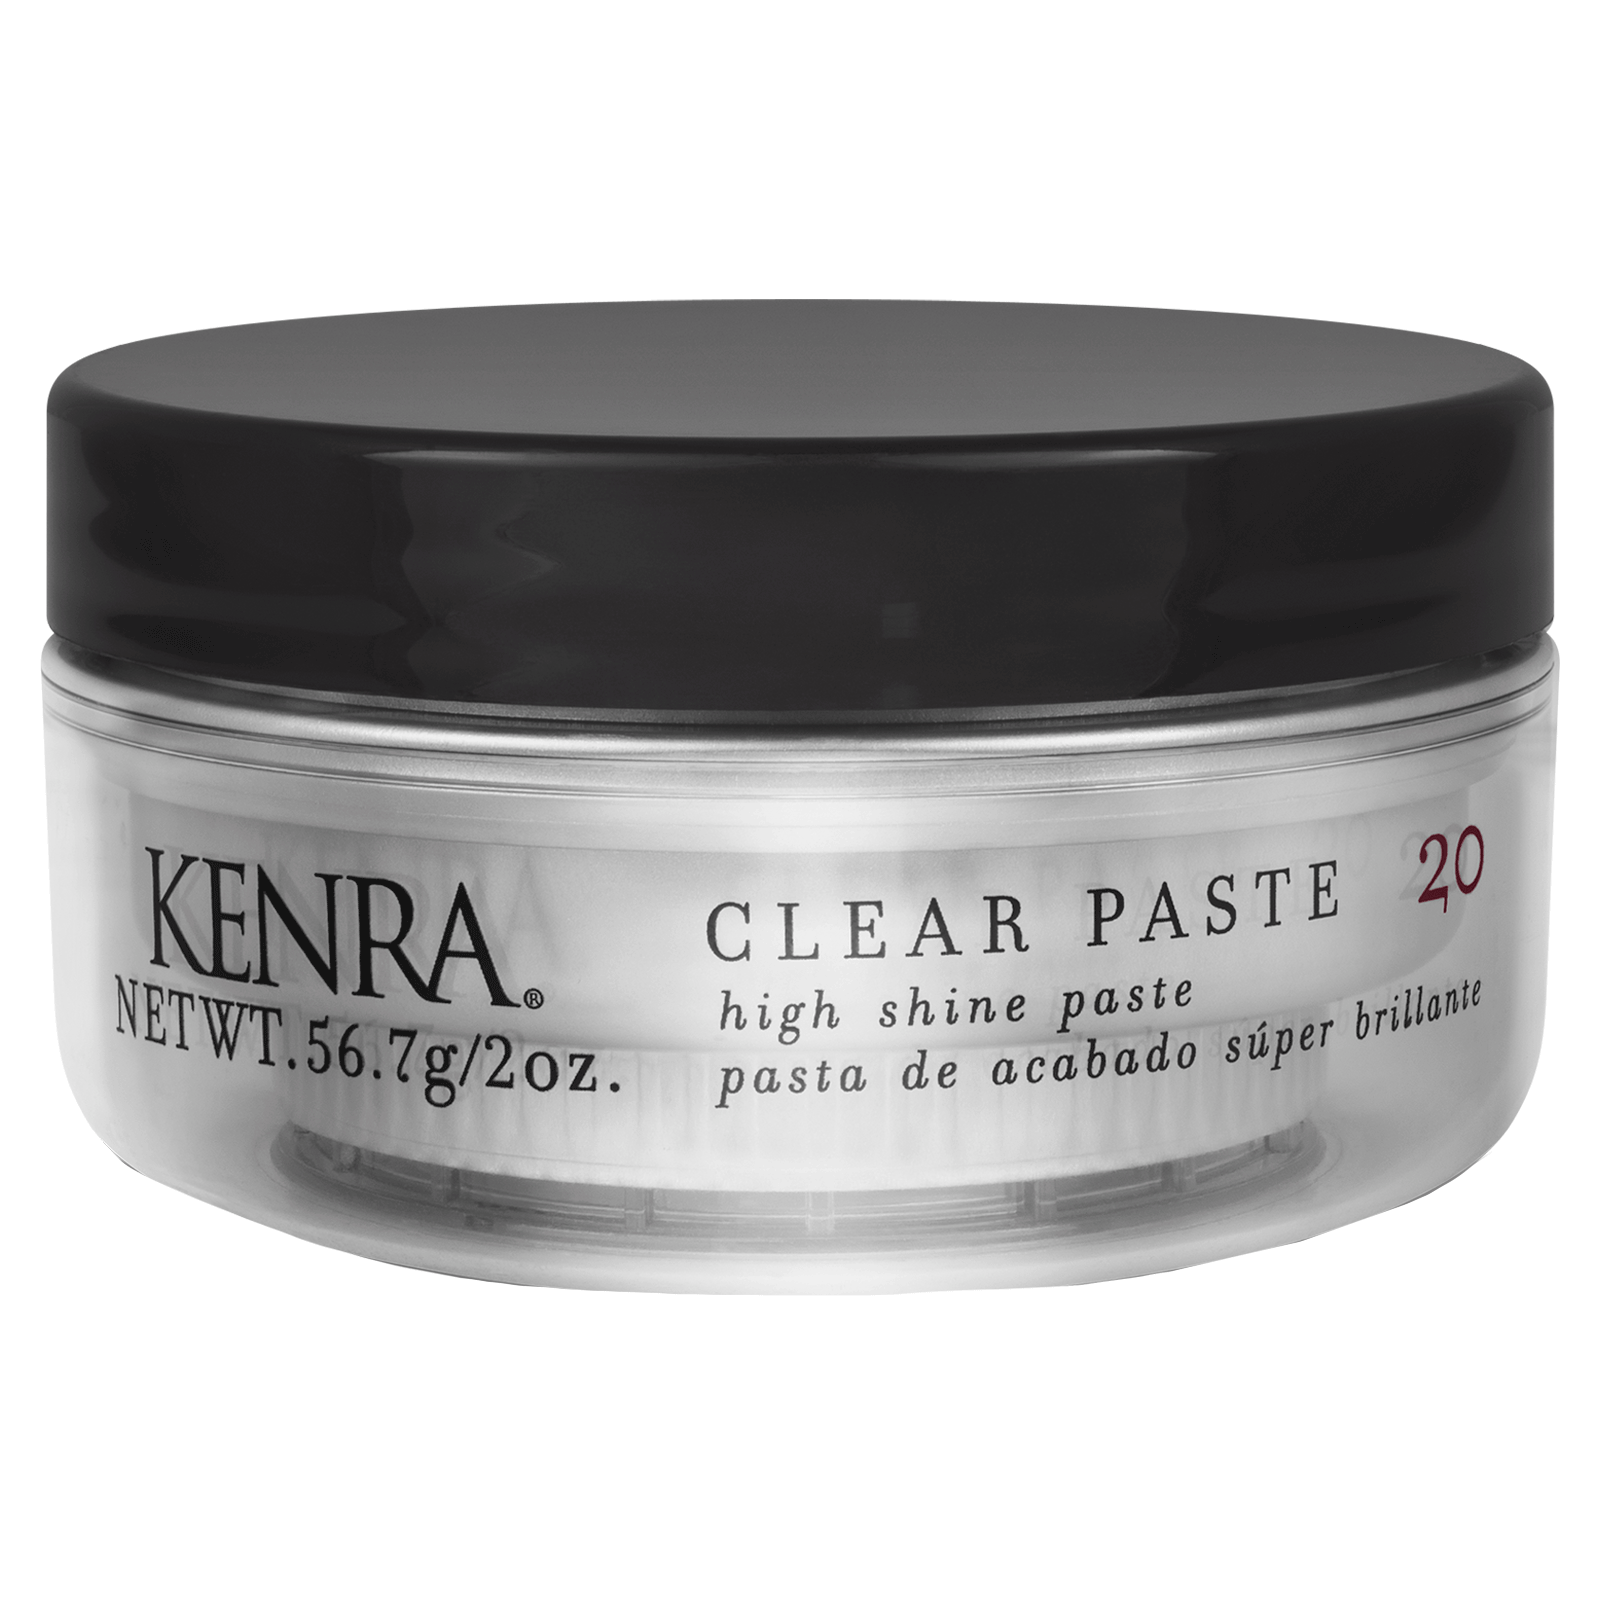 Clear Paste 20 - Kenra Professional | CosmoProf